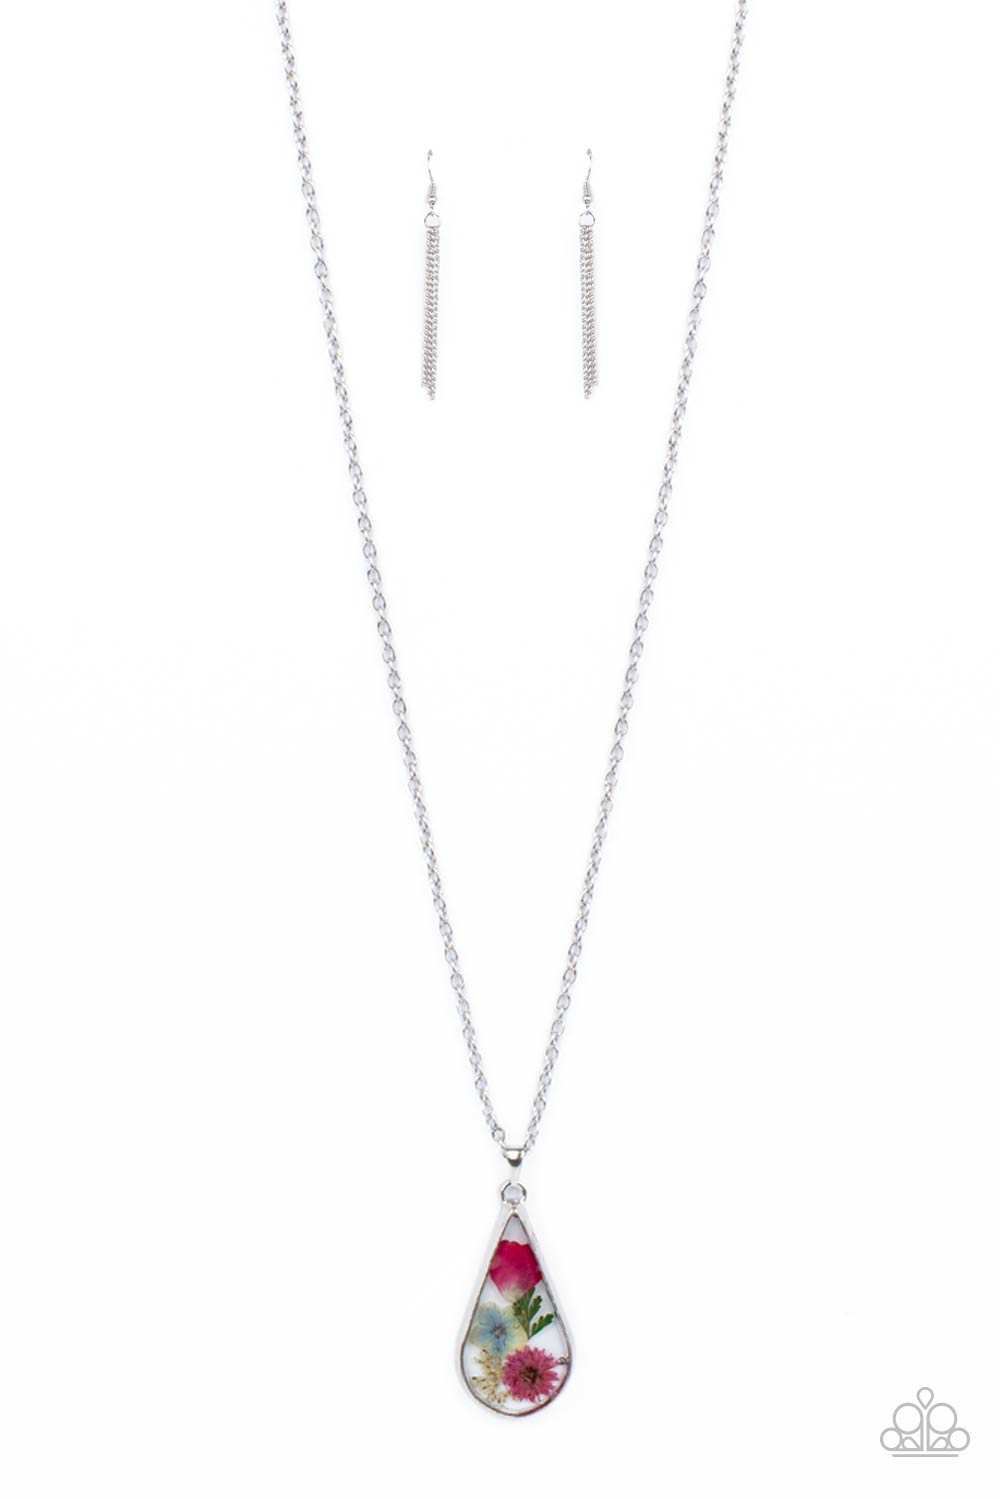 Necklace - Pop Goes the Perennial - Pink